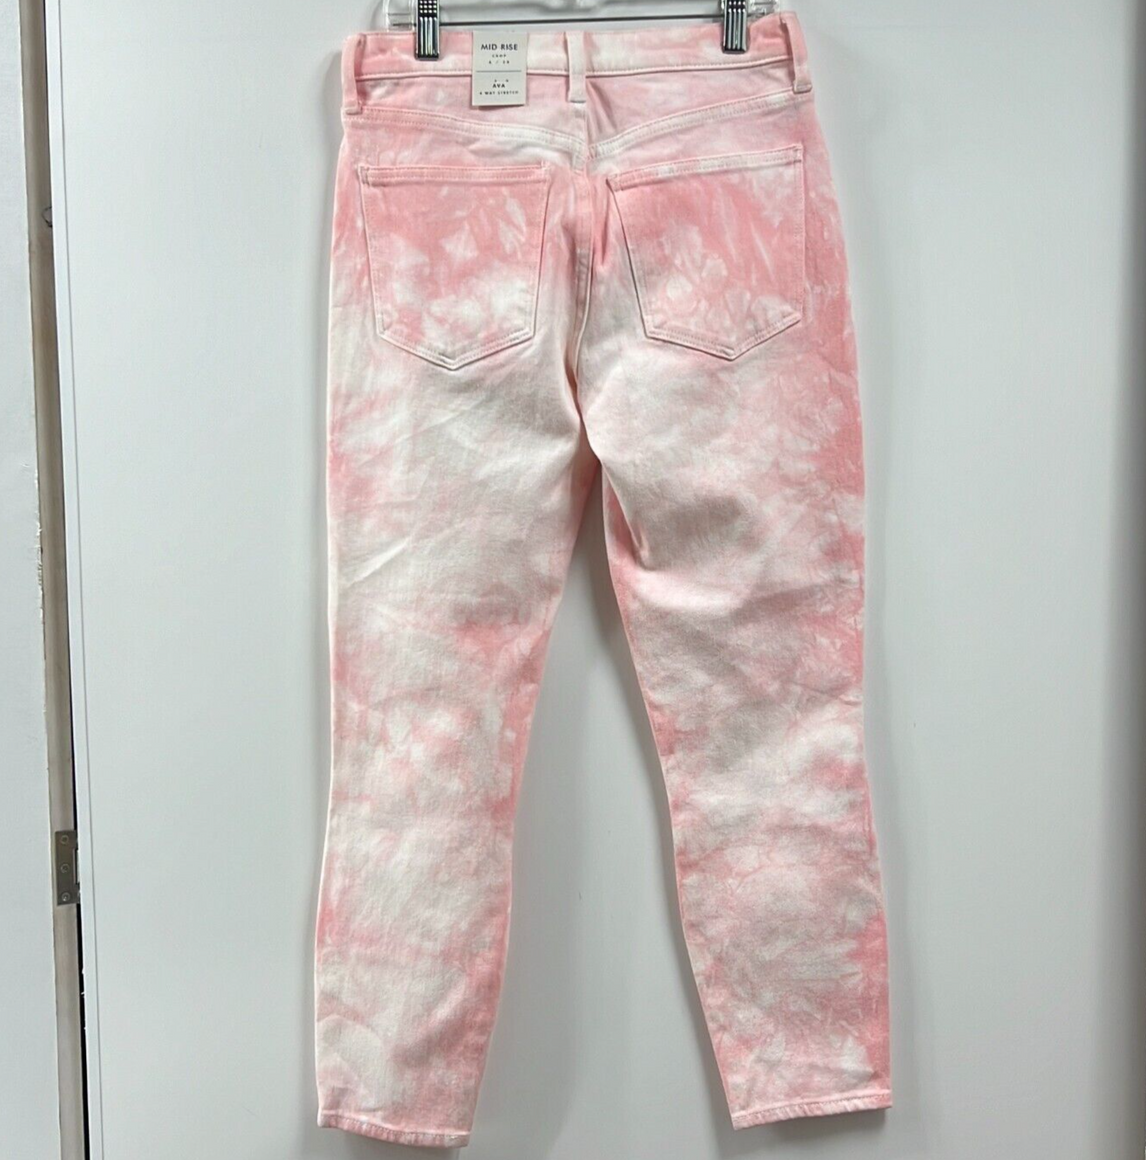 Shop for Size 6, Cropped, Jeans, Womens